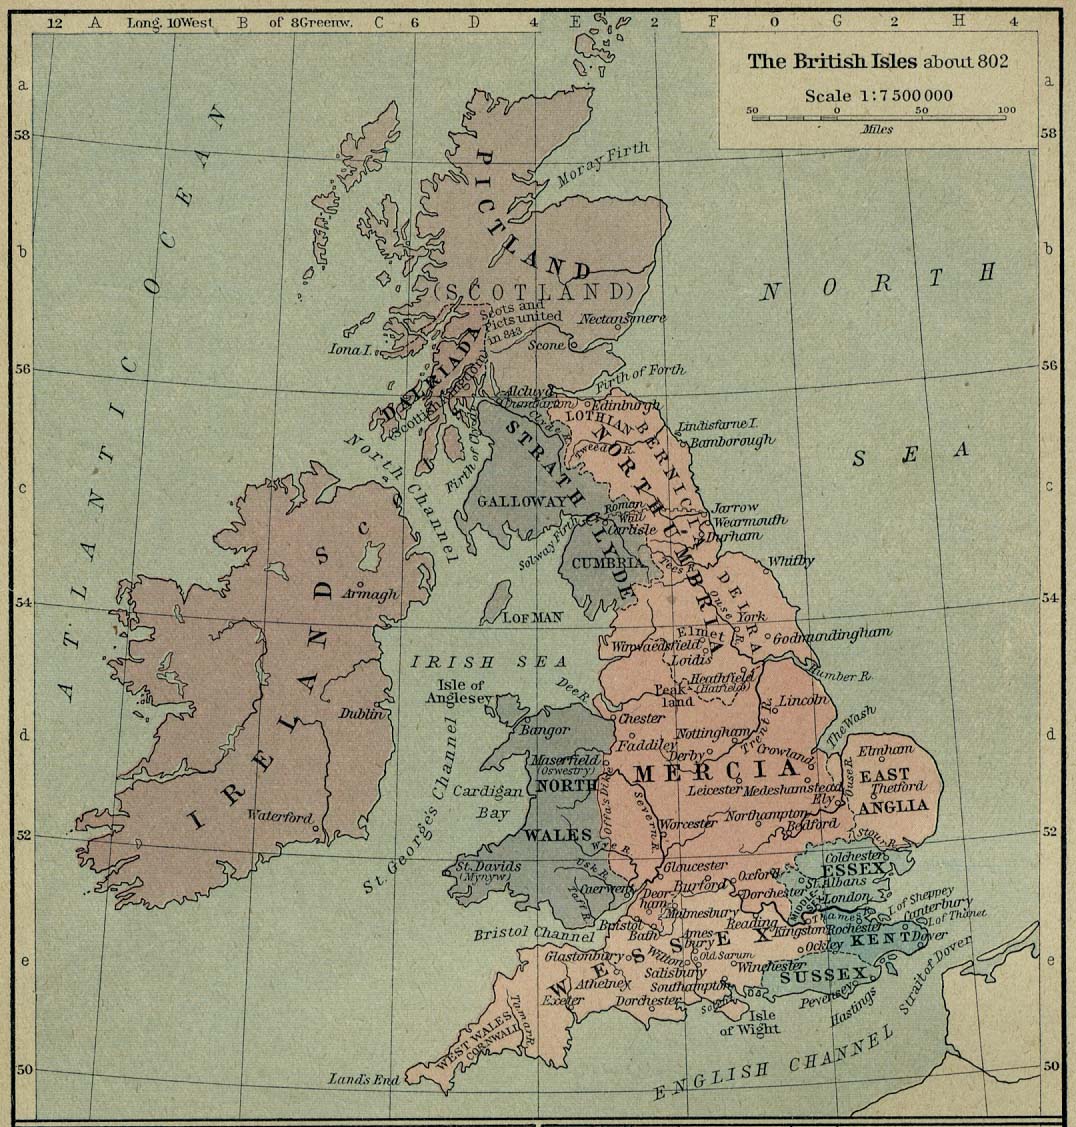 Map of the British Isles about 802